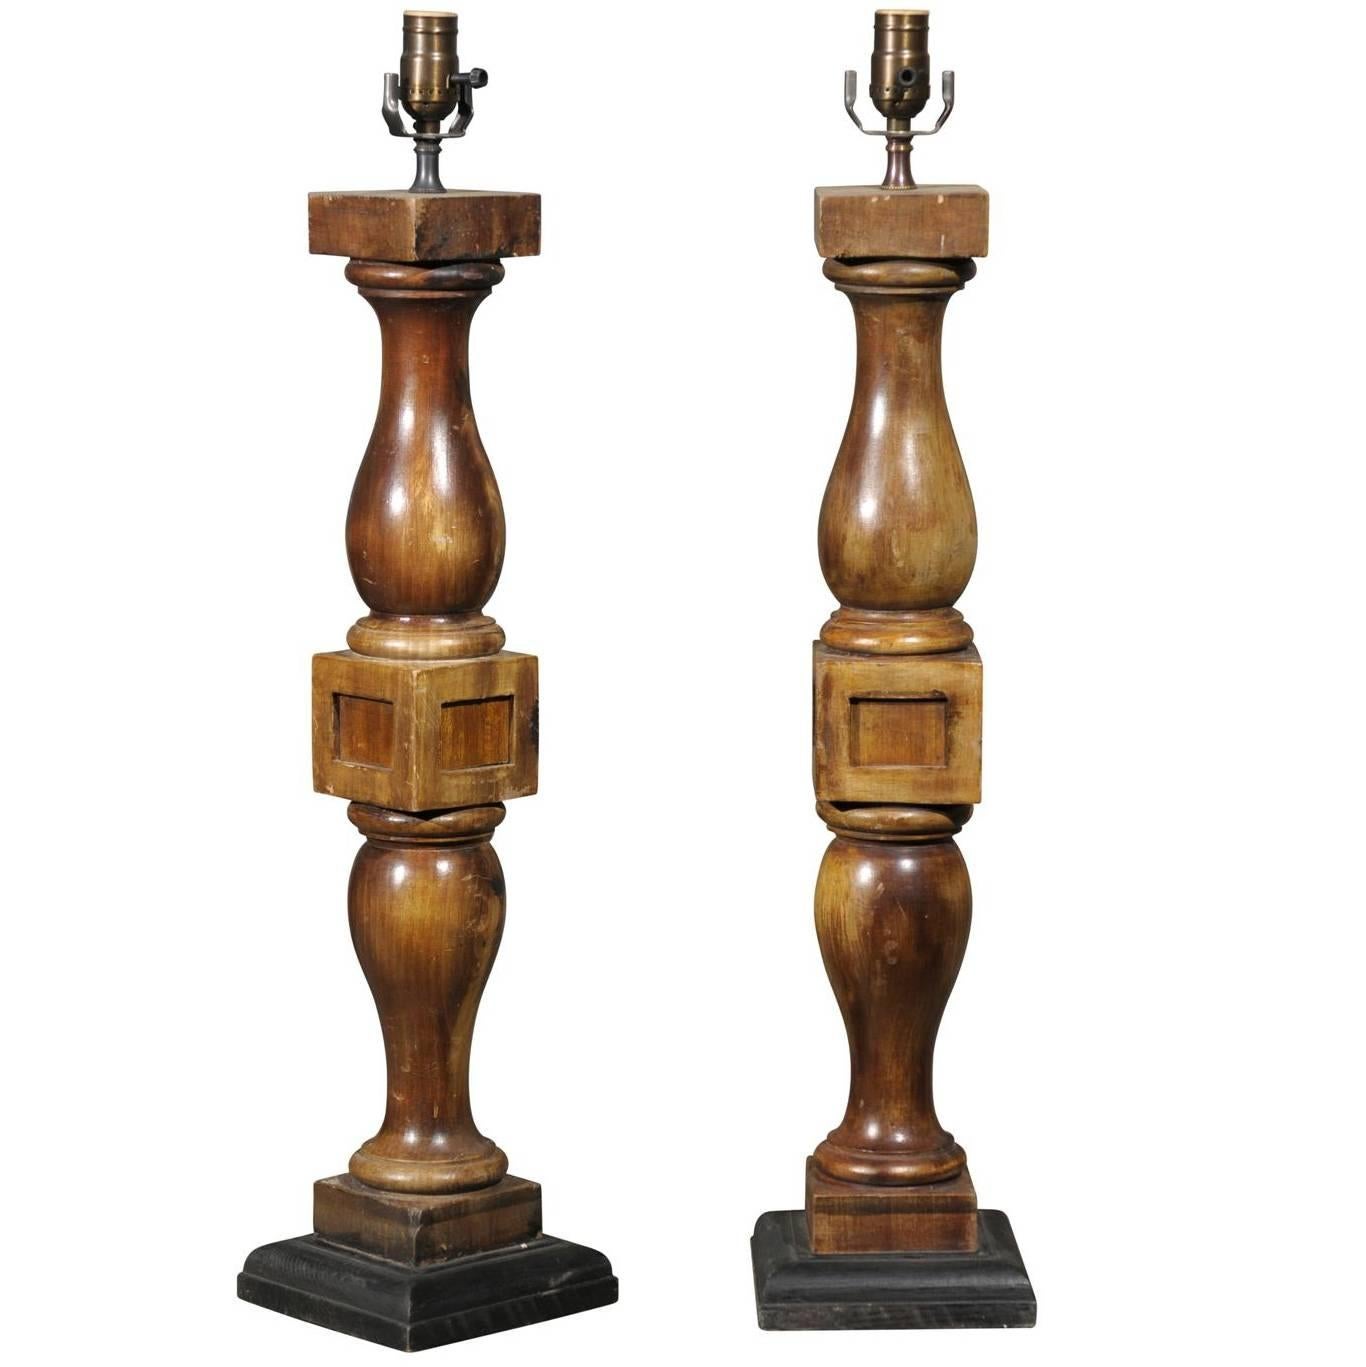 Pair of Brown Stained Wood Turned Banister Table Lamps